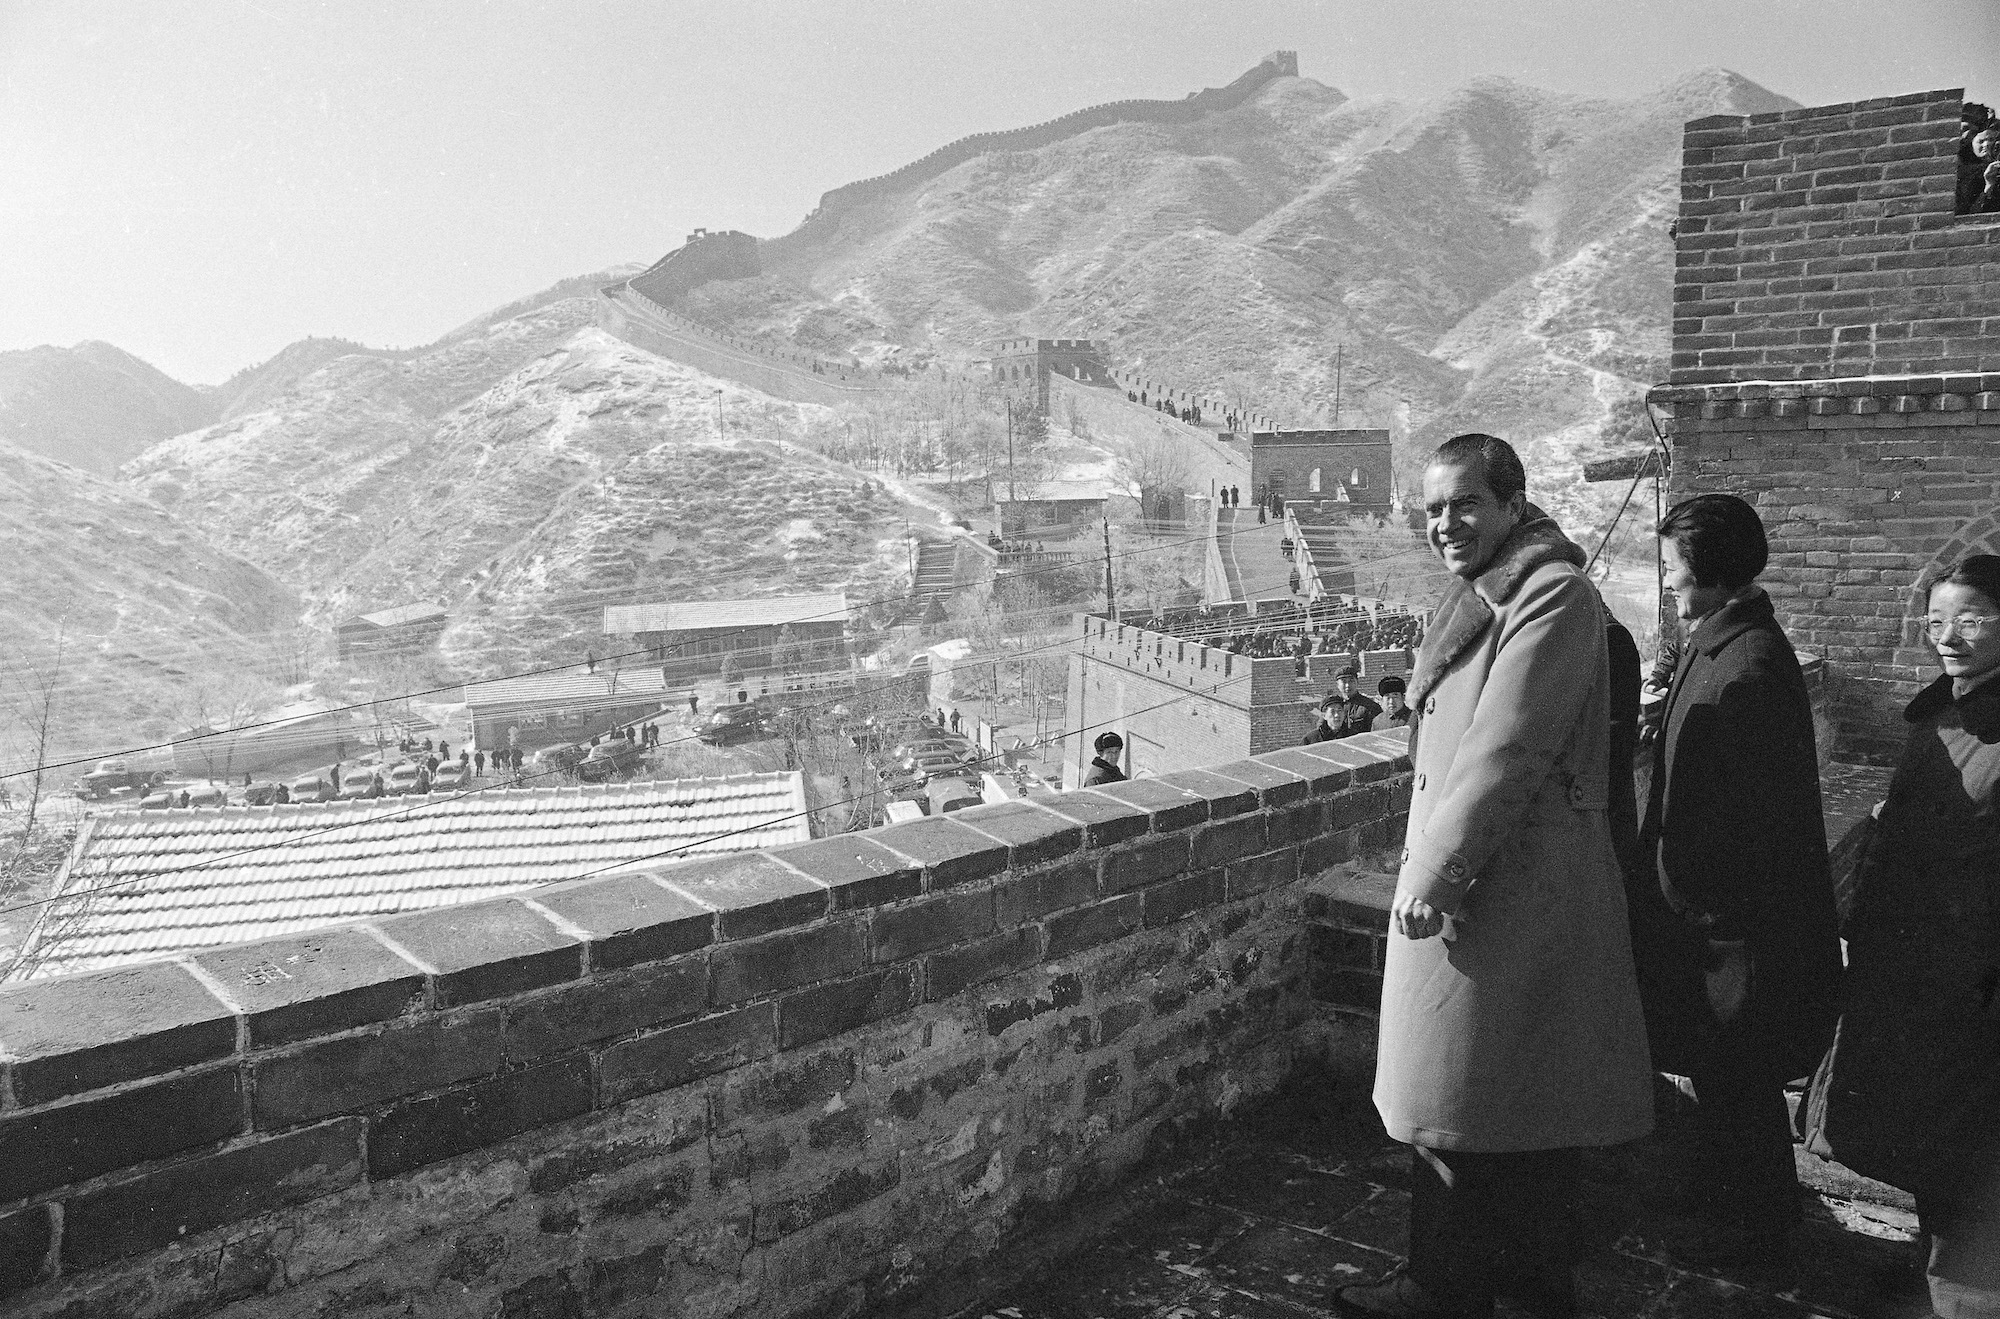 President Richard Nixon stands on the Great Wall of China, as the wall extends along the mountainside in the background